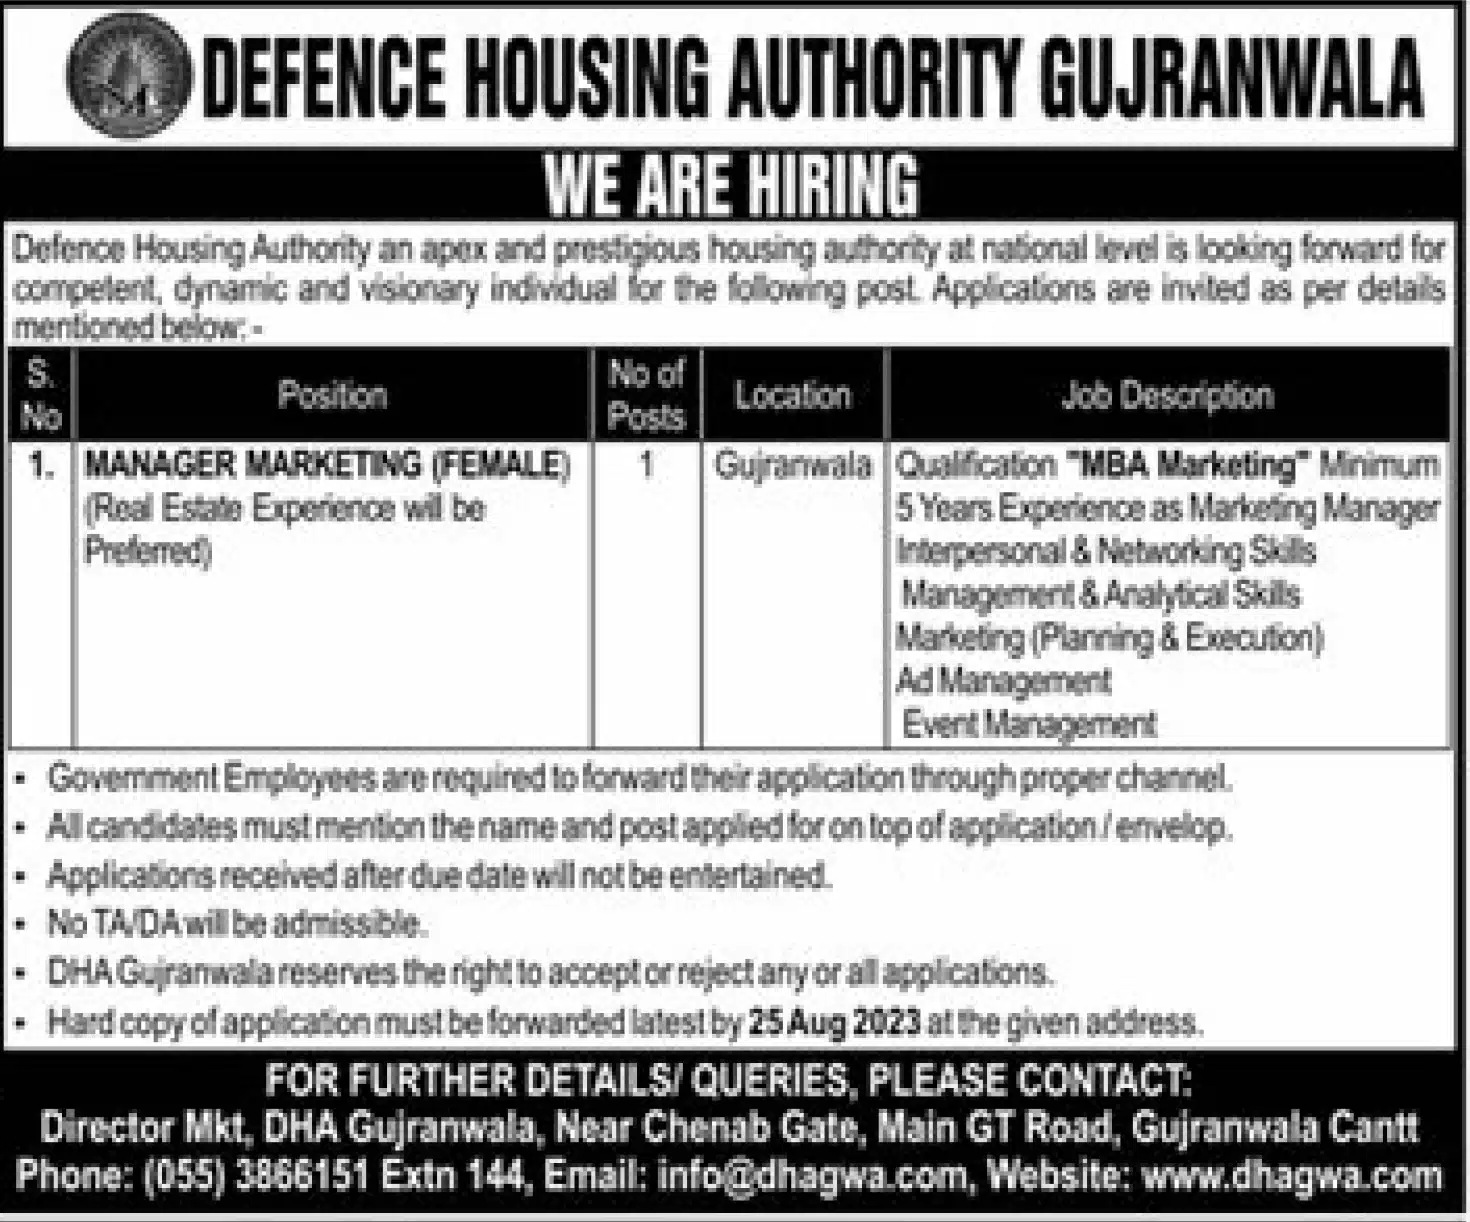 DHA Gujranwala Career Notice for Manager Marketing